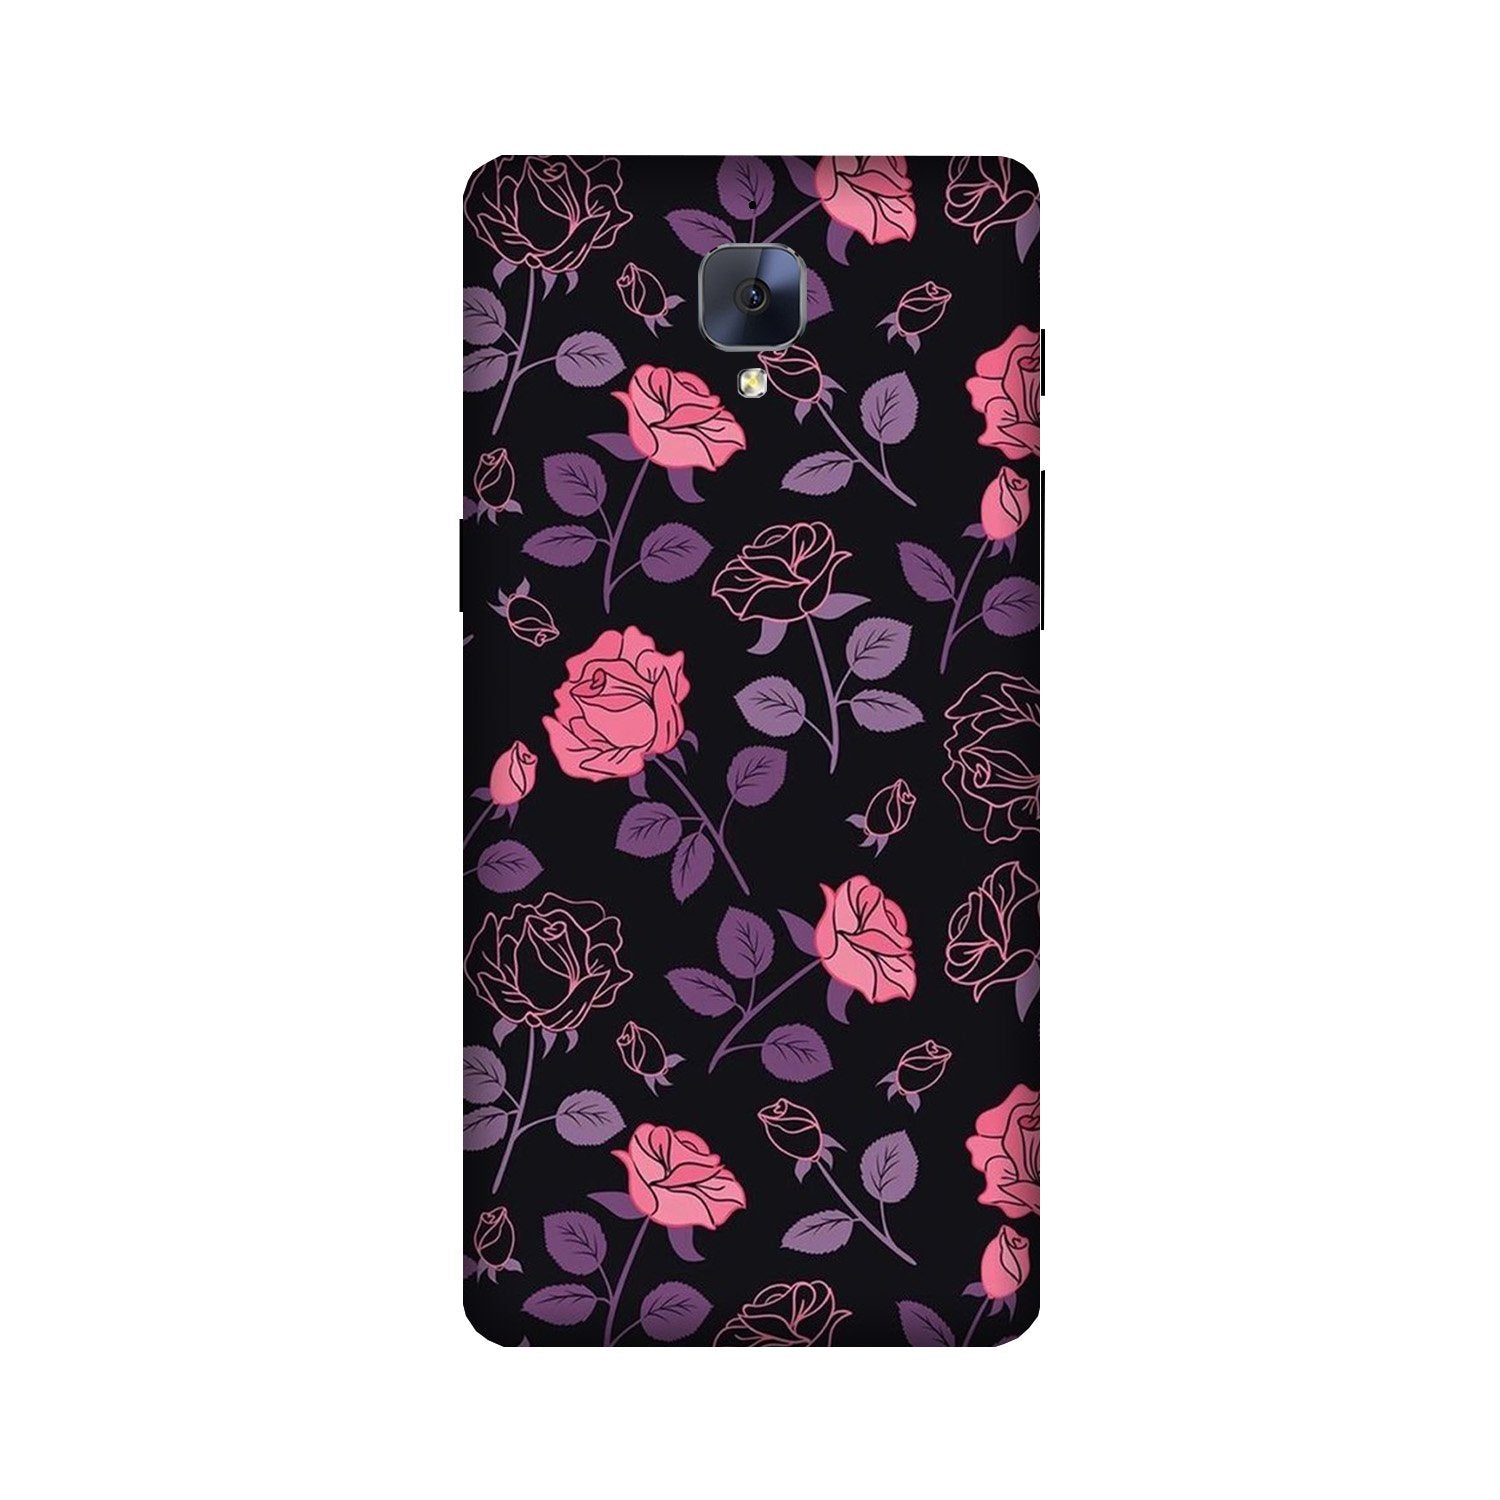 Rose Black Background Case for OnePlus 3/ 3T